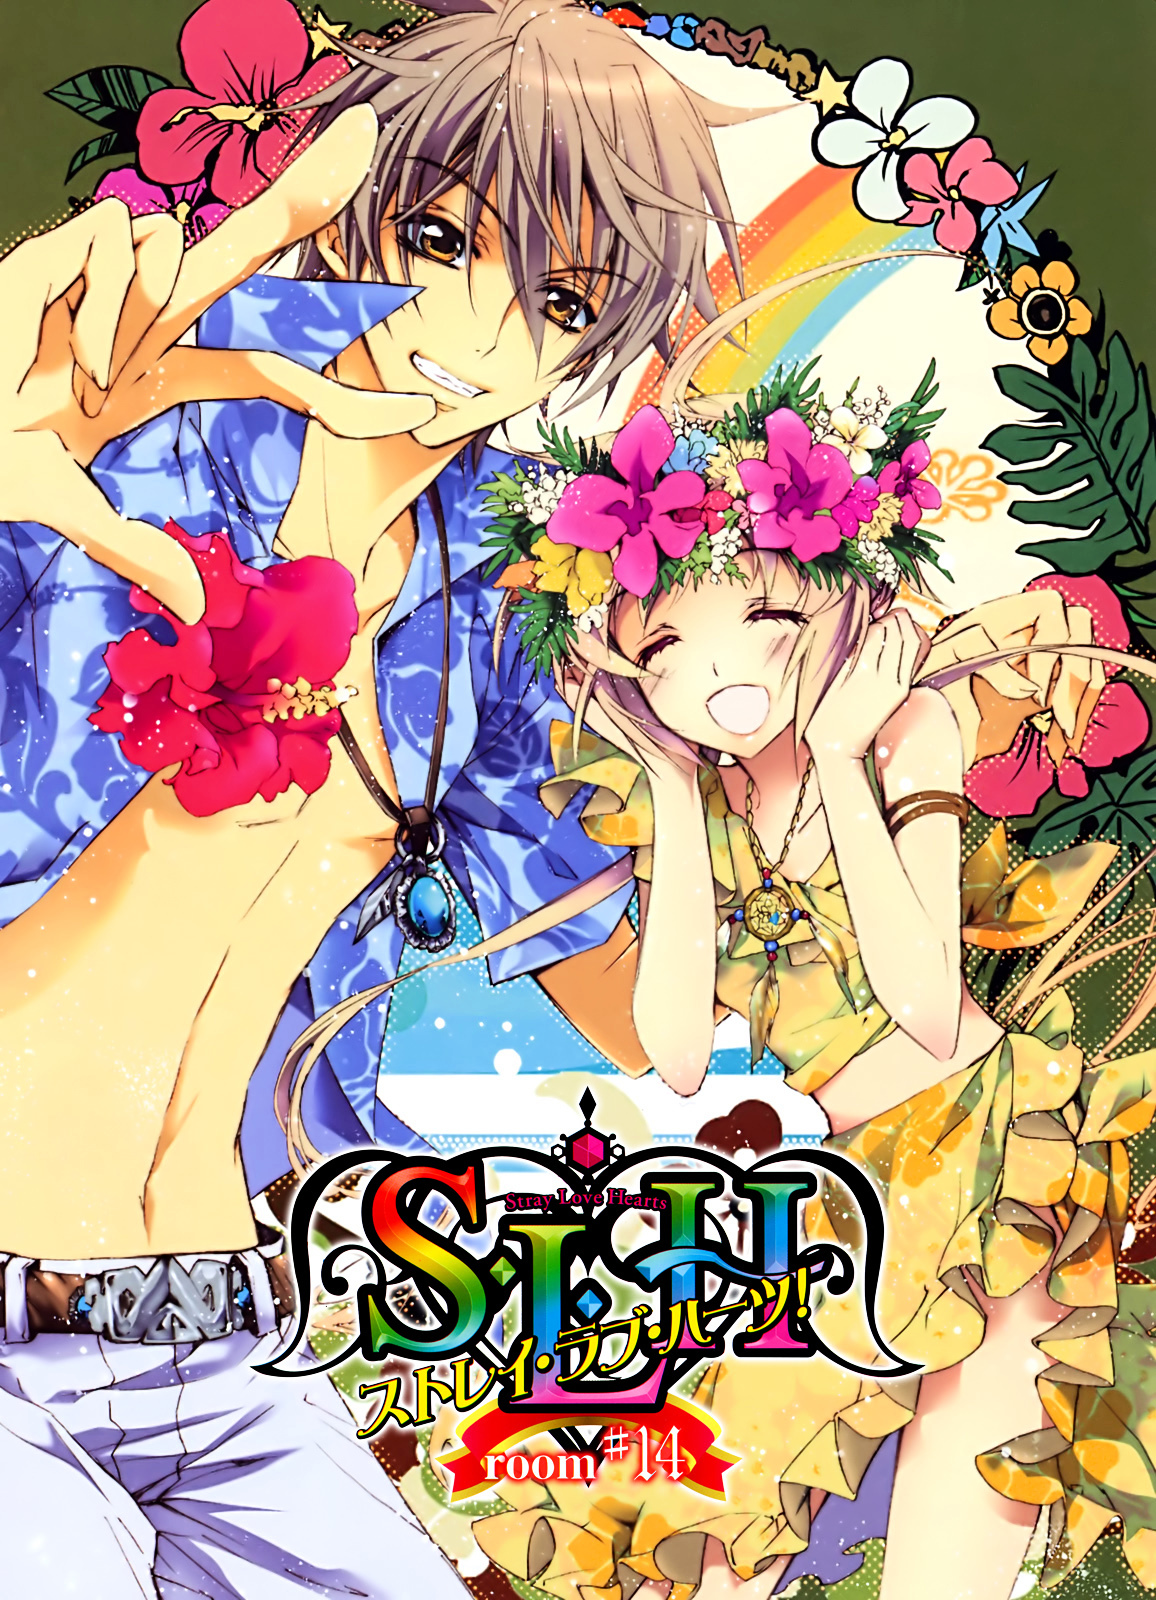 Stray Love Hearts! Backgrounds, Compatible - PC, Mobile, Gadgets| 1156x1600 px